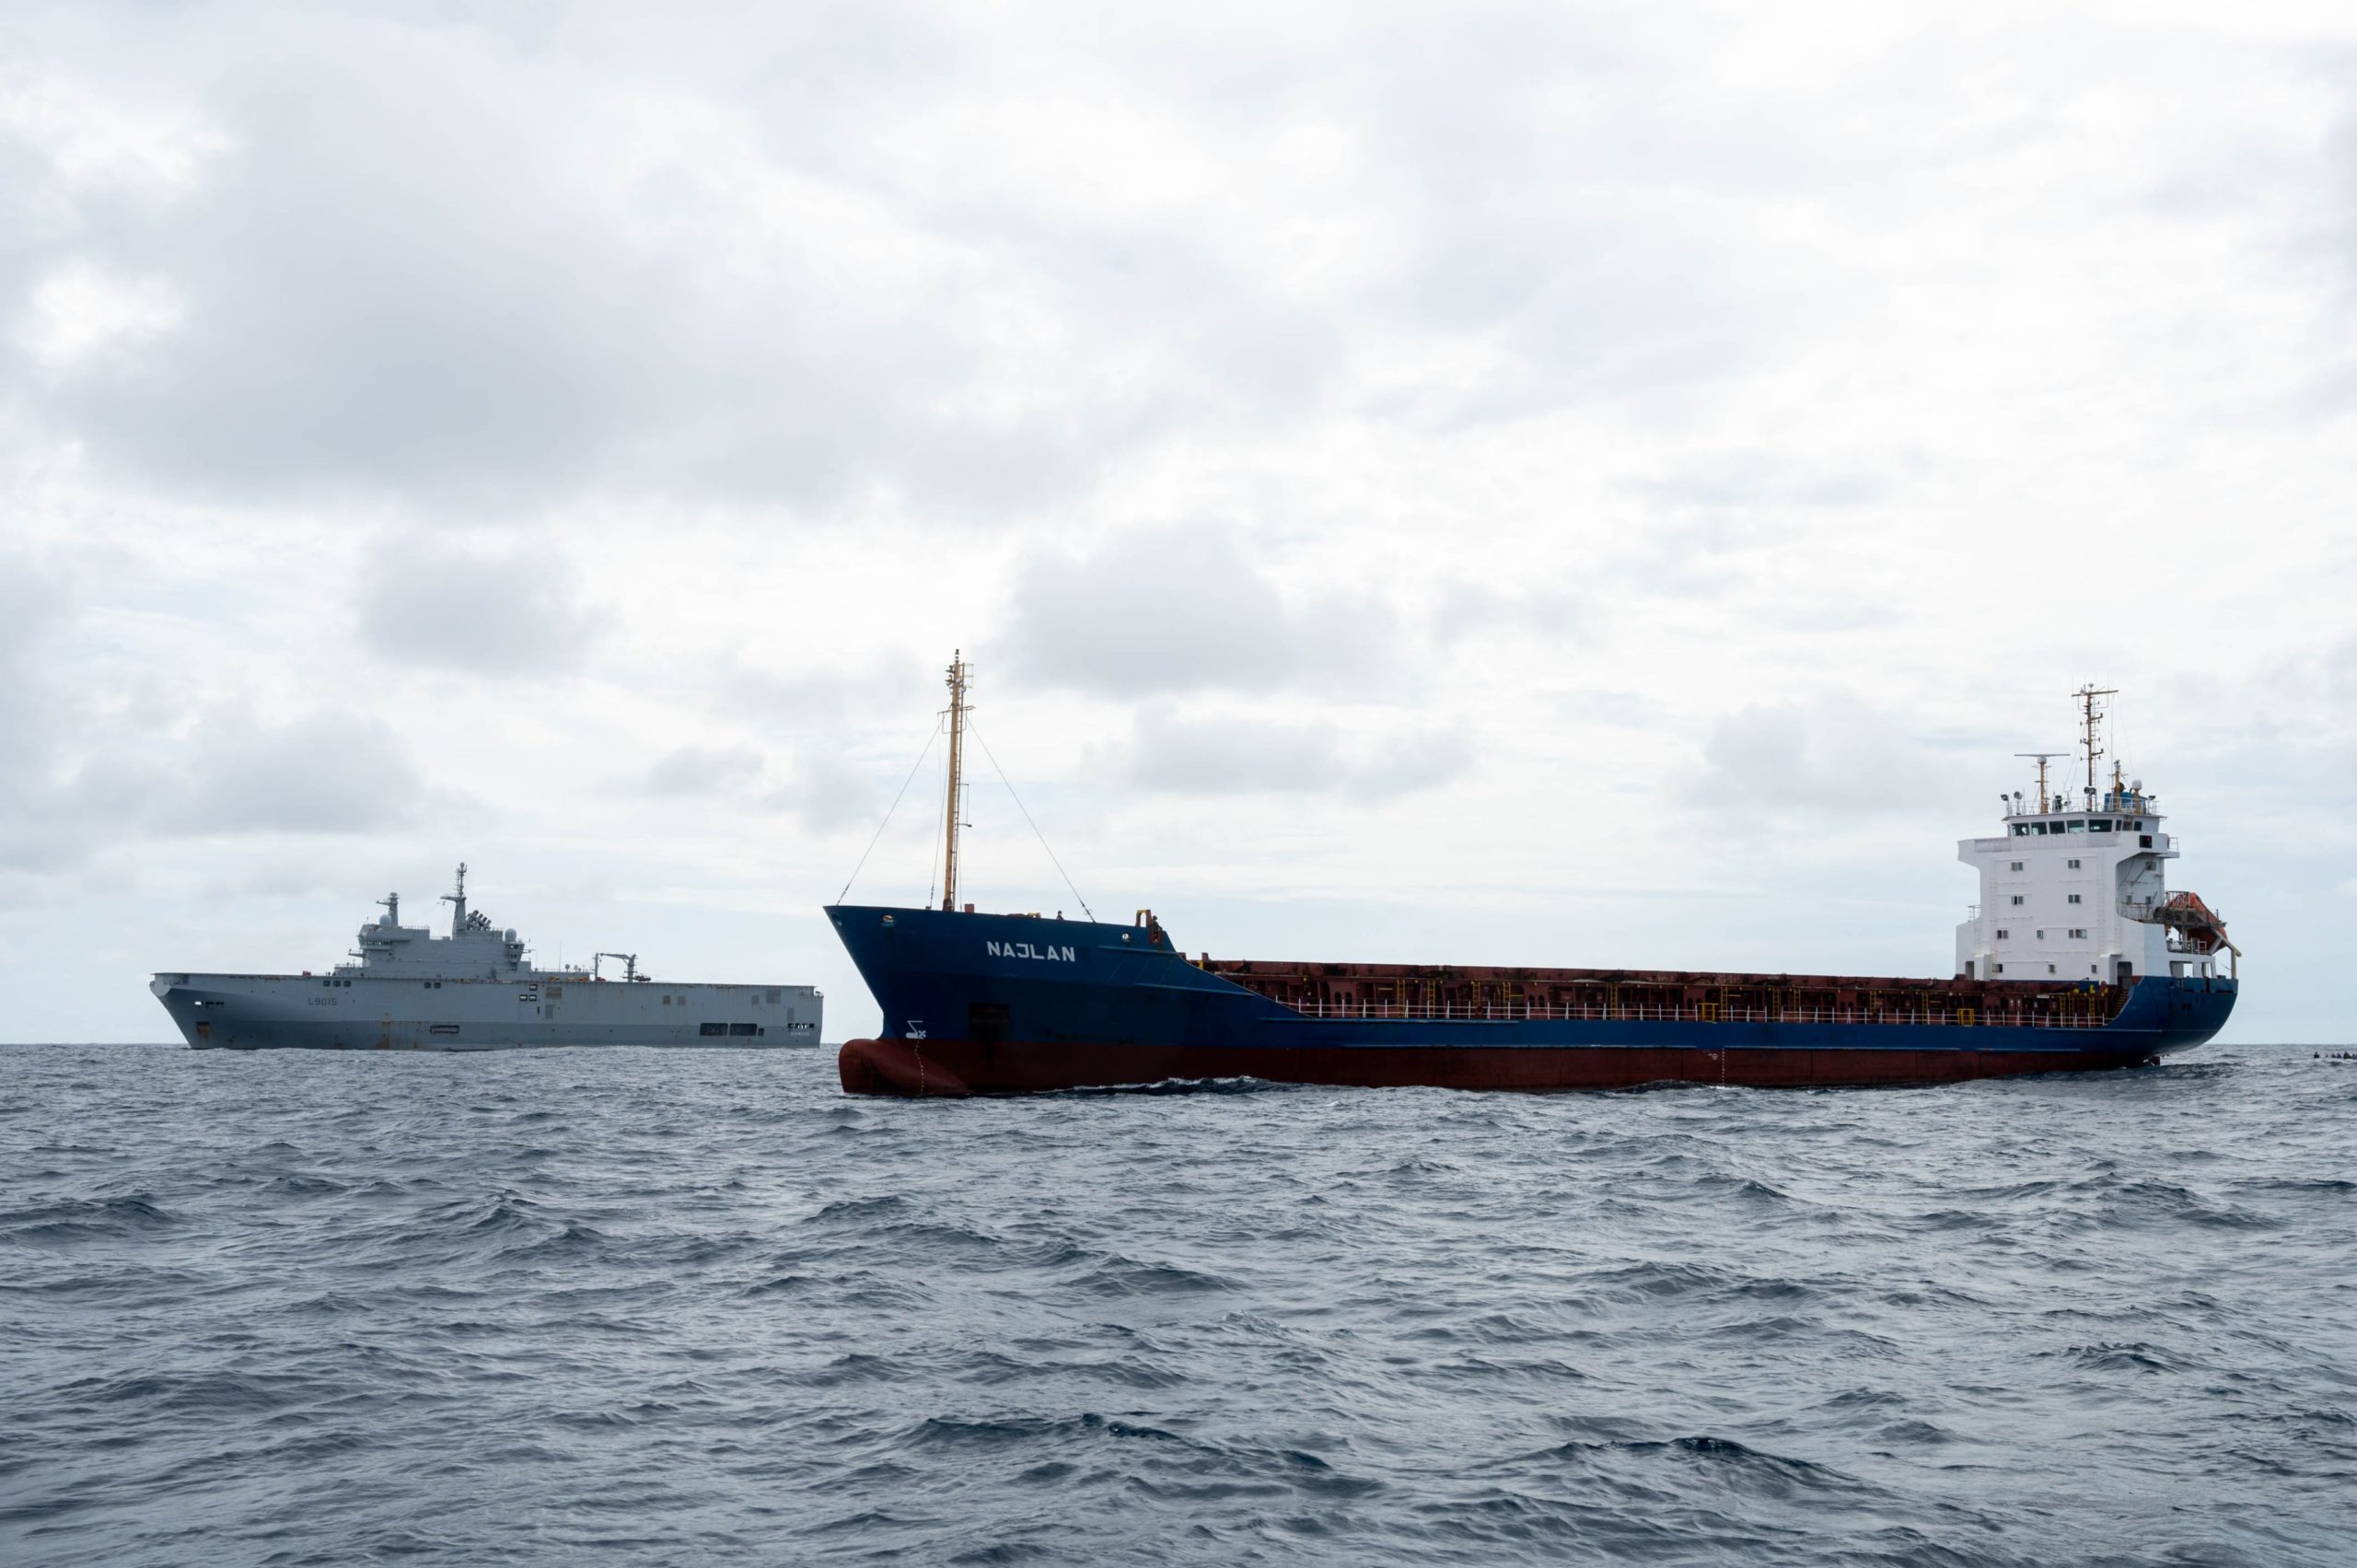 IMB Calls for Continued Naval Presence as Worldwide Piracy Falls to Lowest Level in Decades